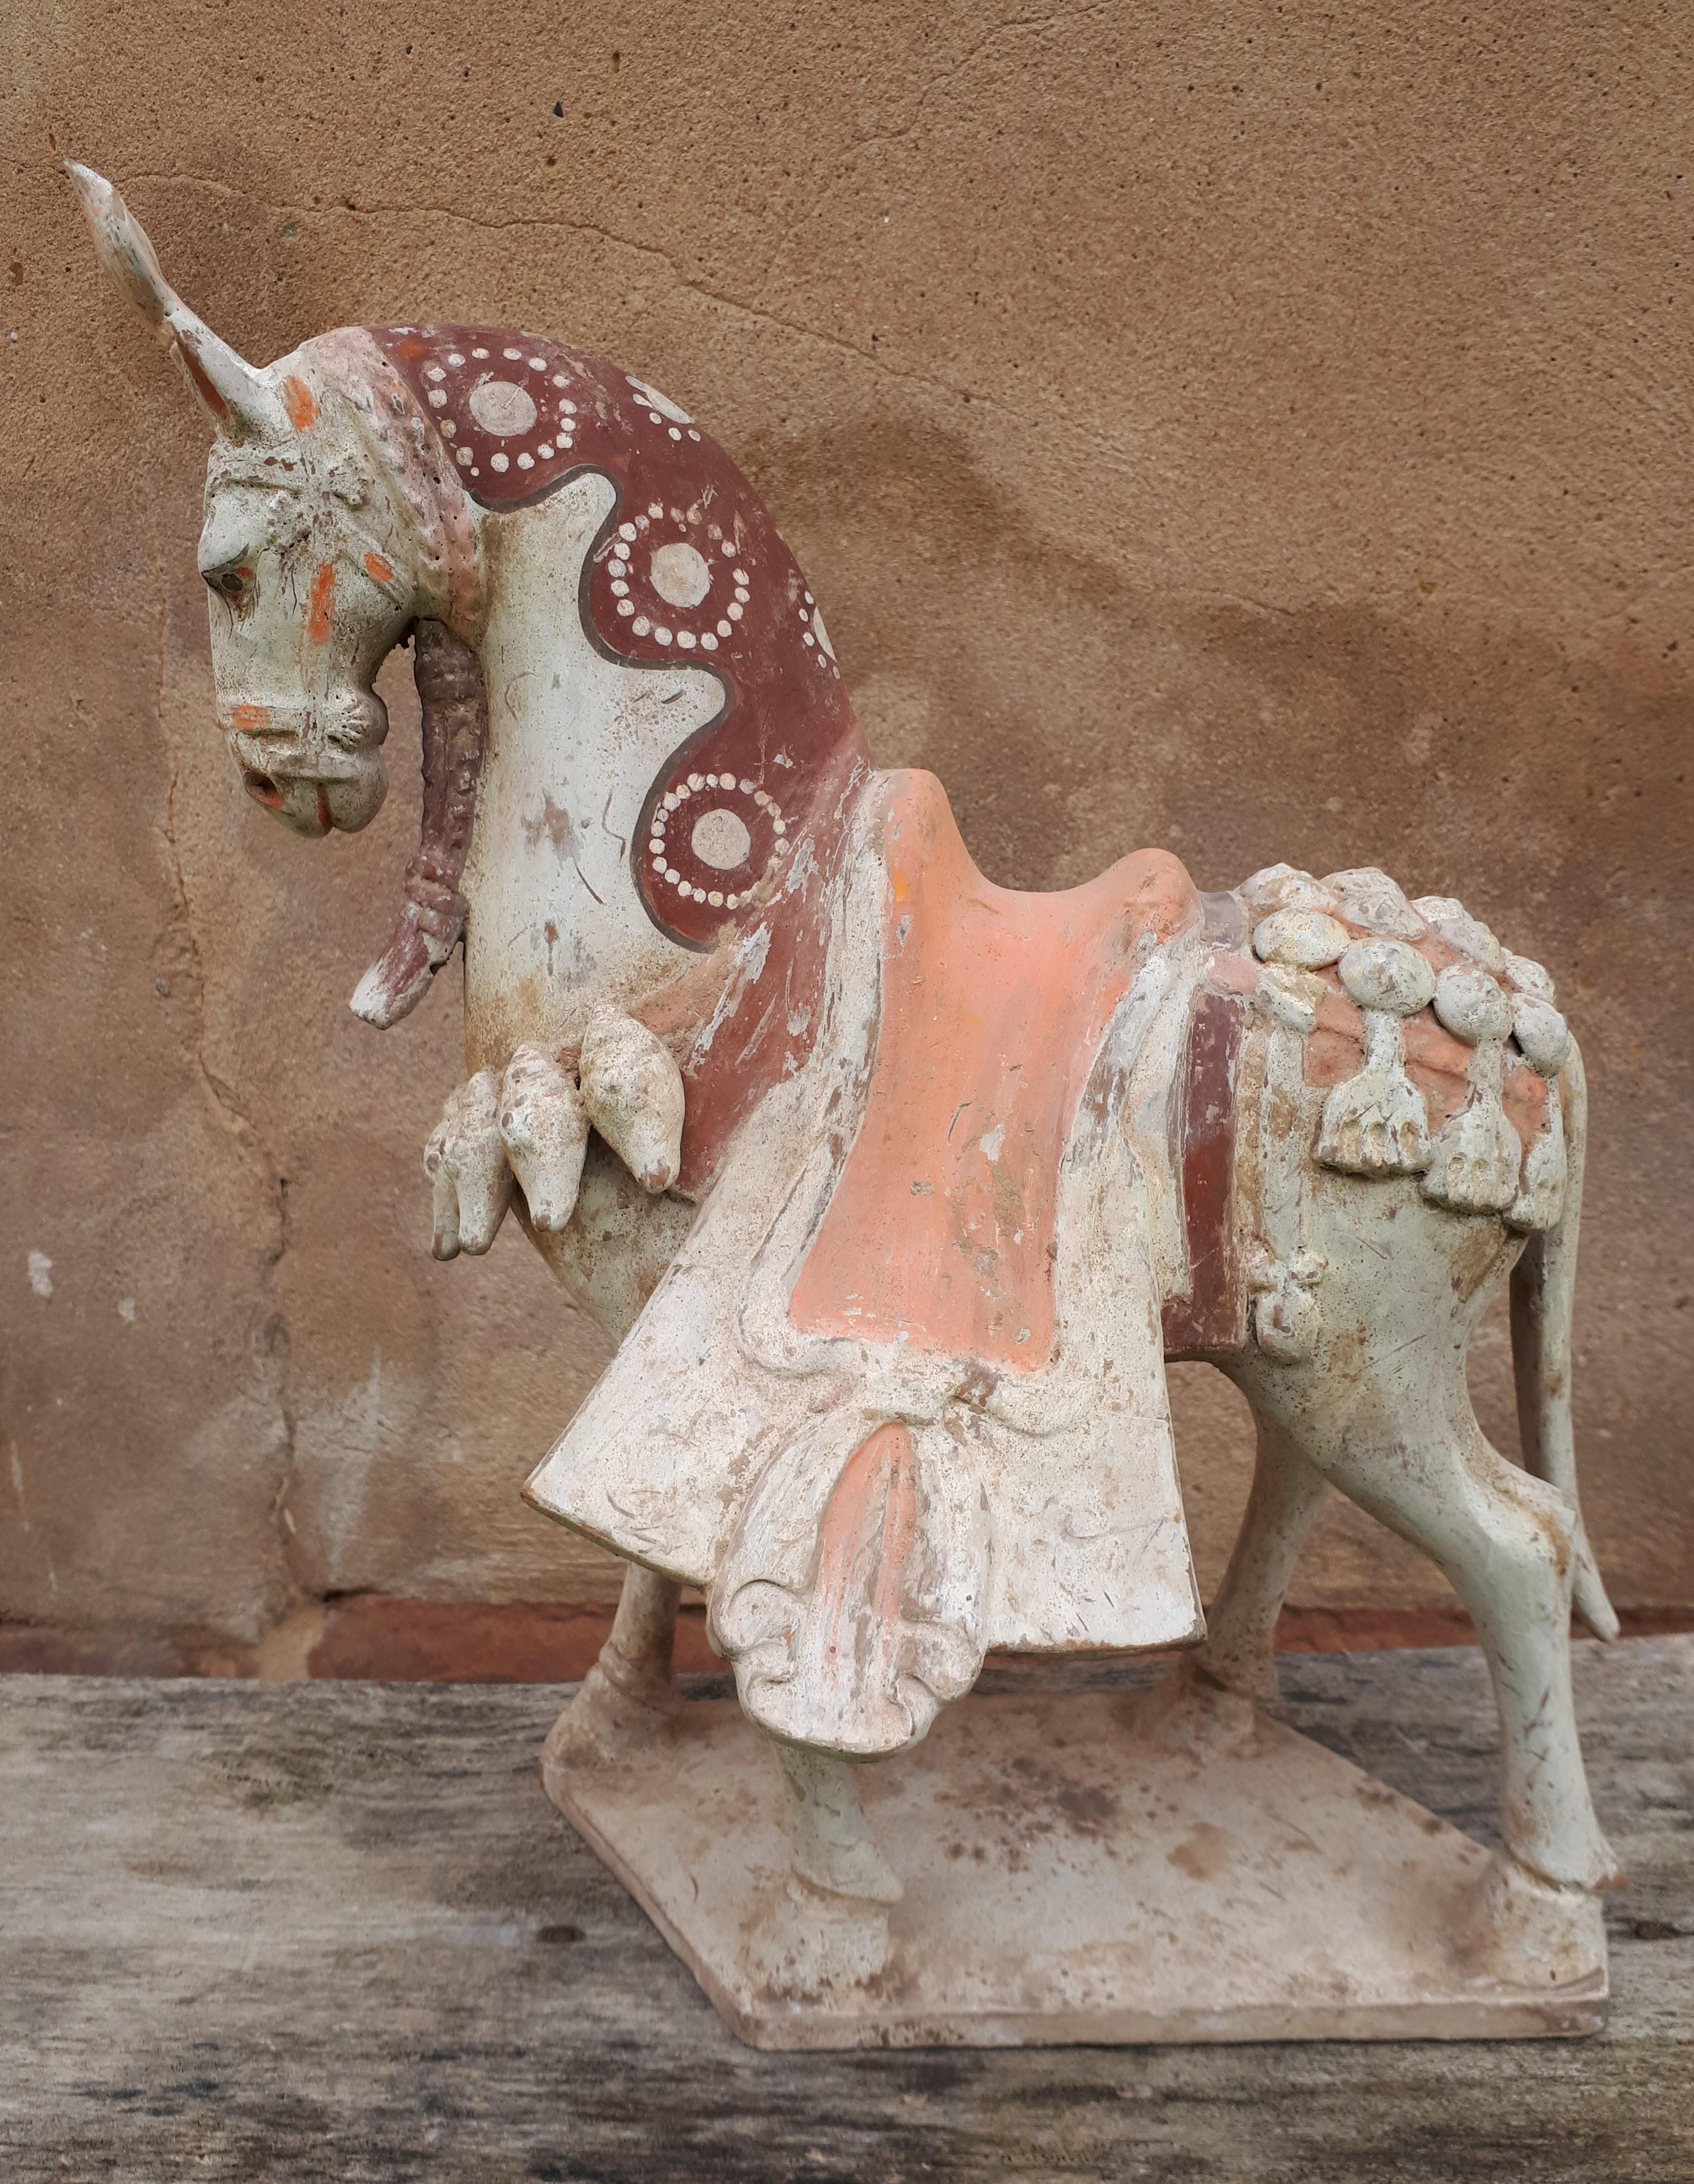 Terracotta mingqi with white slip and polychromy, representing a horse with its finery.
Very good to perfect condition.
Please note that all ancient Chinese terracotta sculptures were placed in the graves of the deceased to accompany them in their